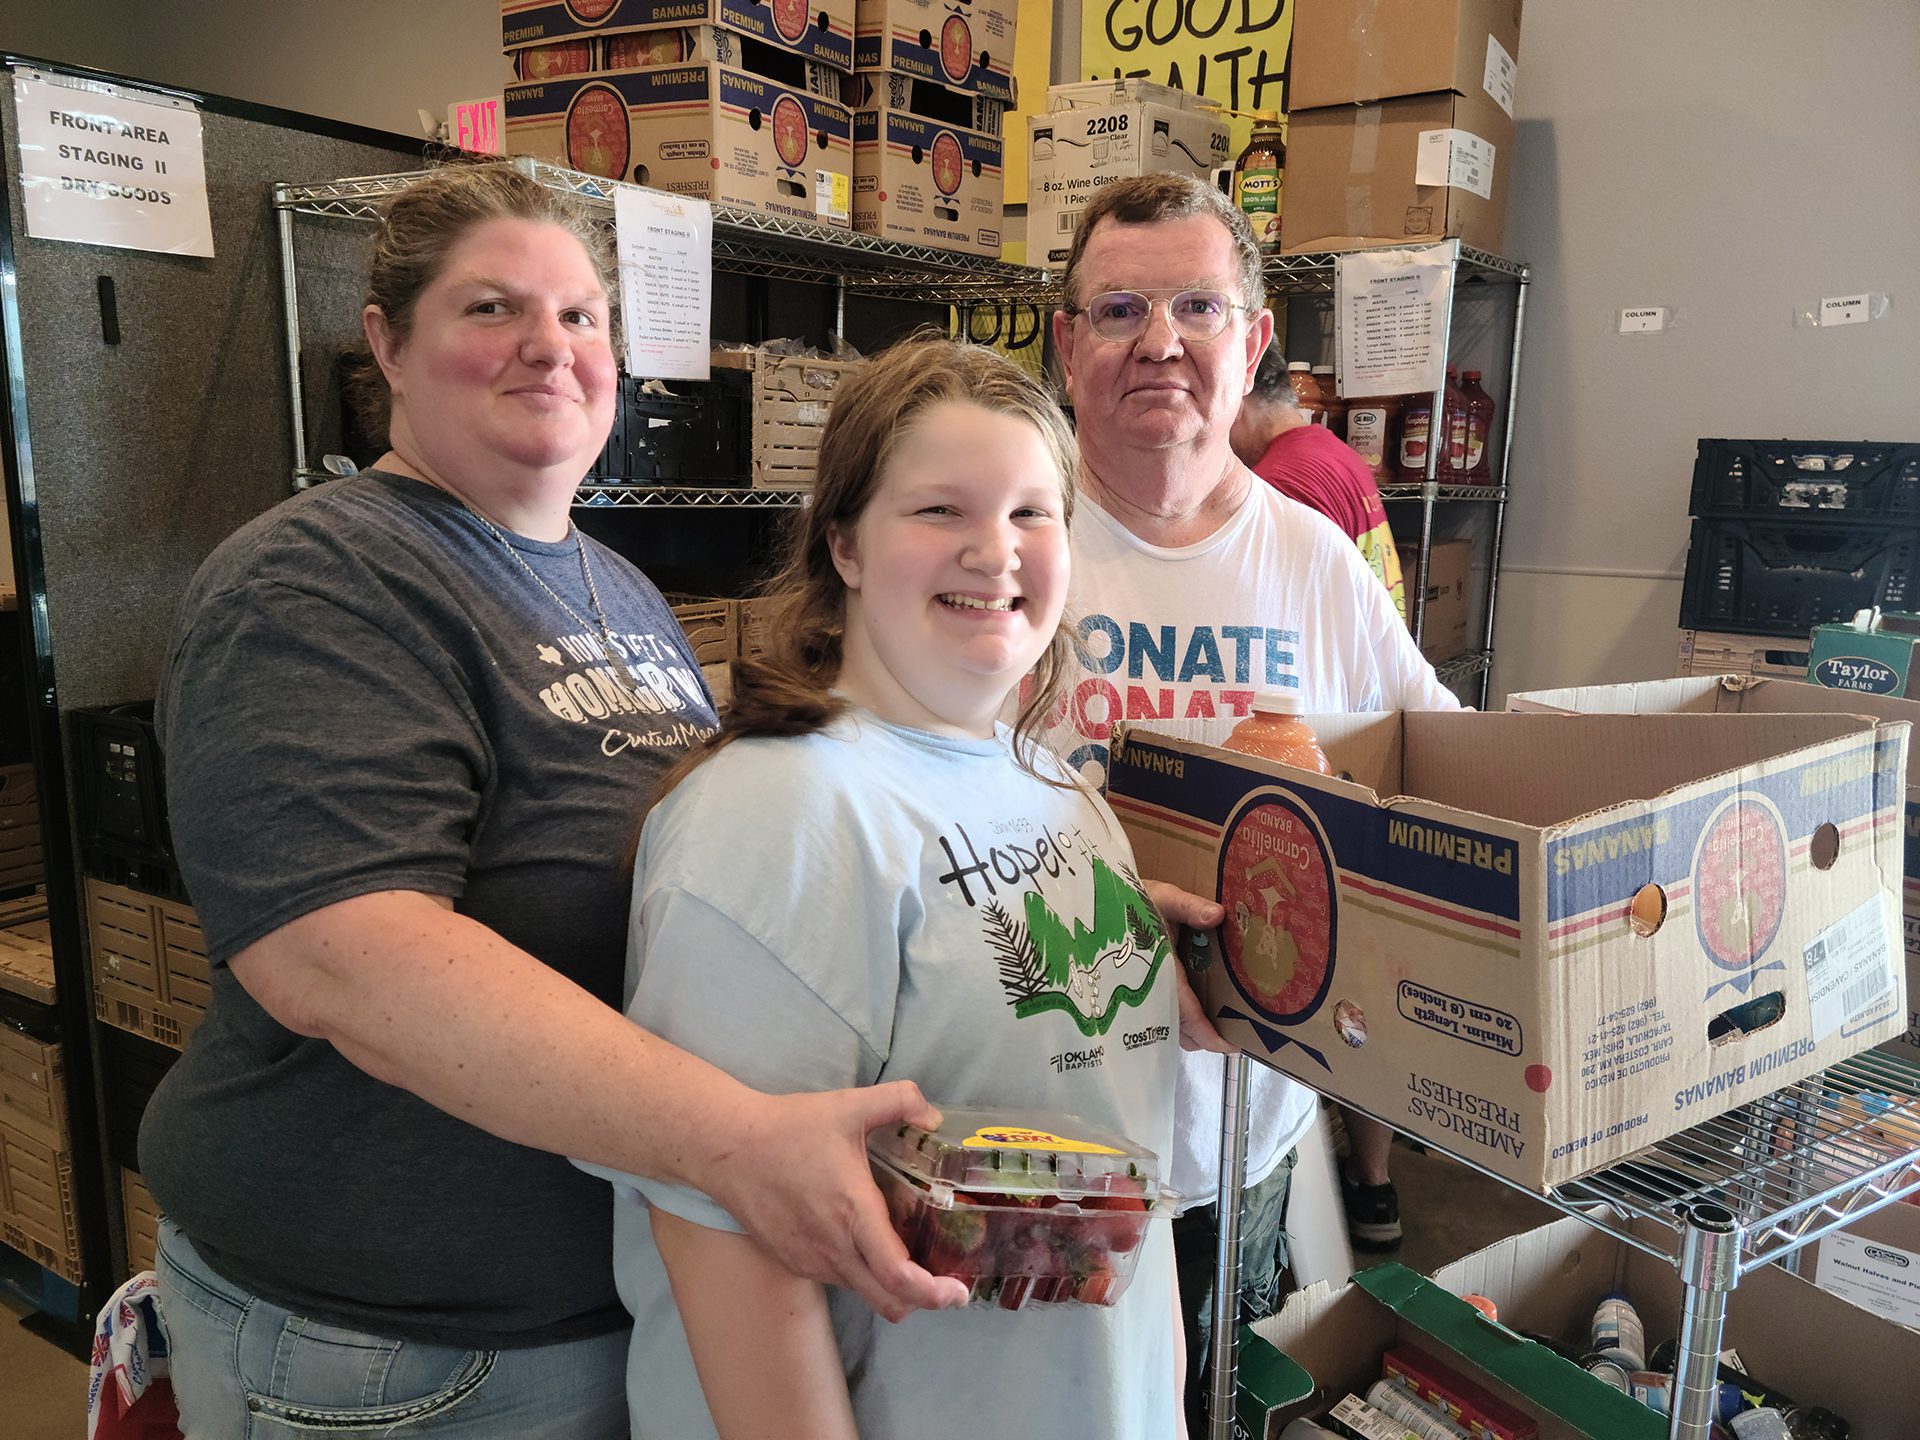 Hailey family volunteers at Amazing Grace Food Pantry